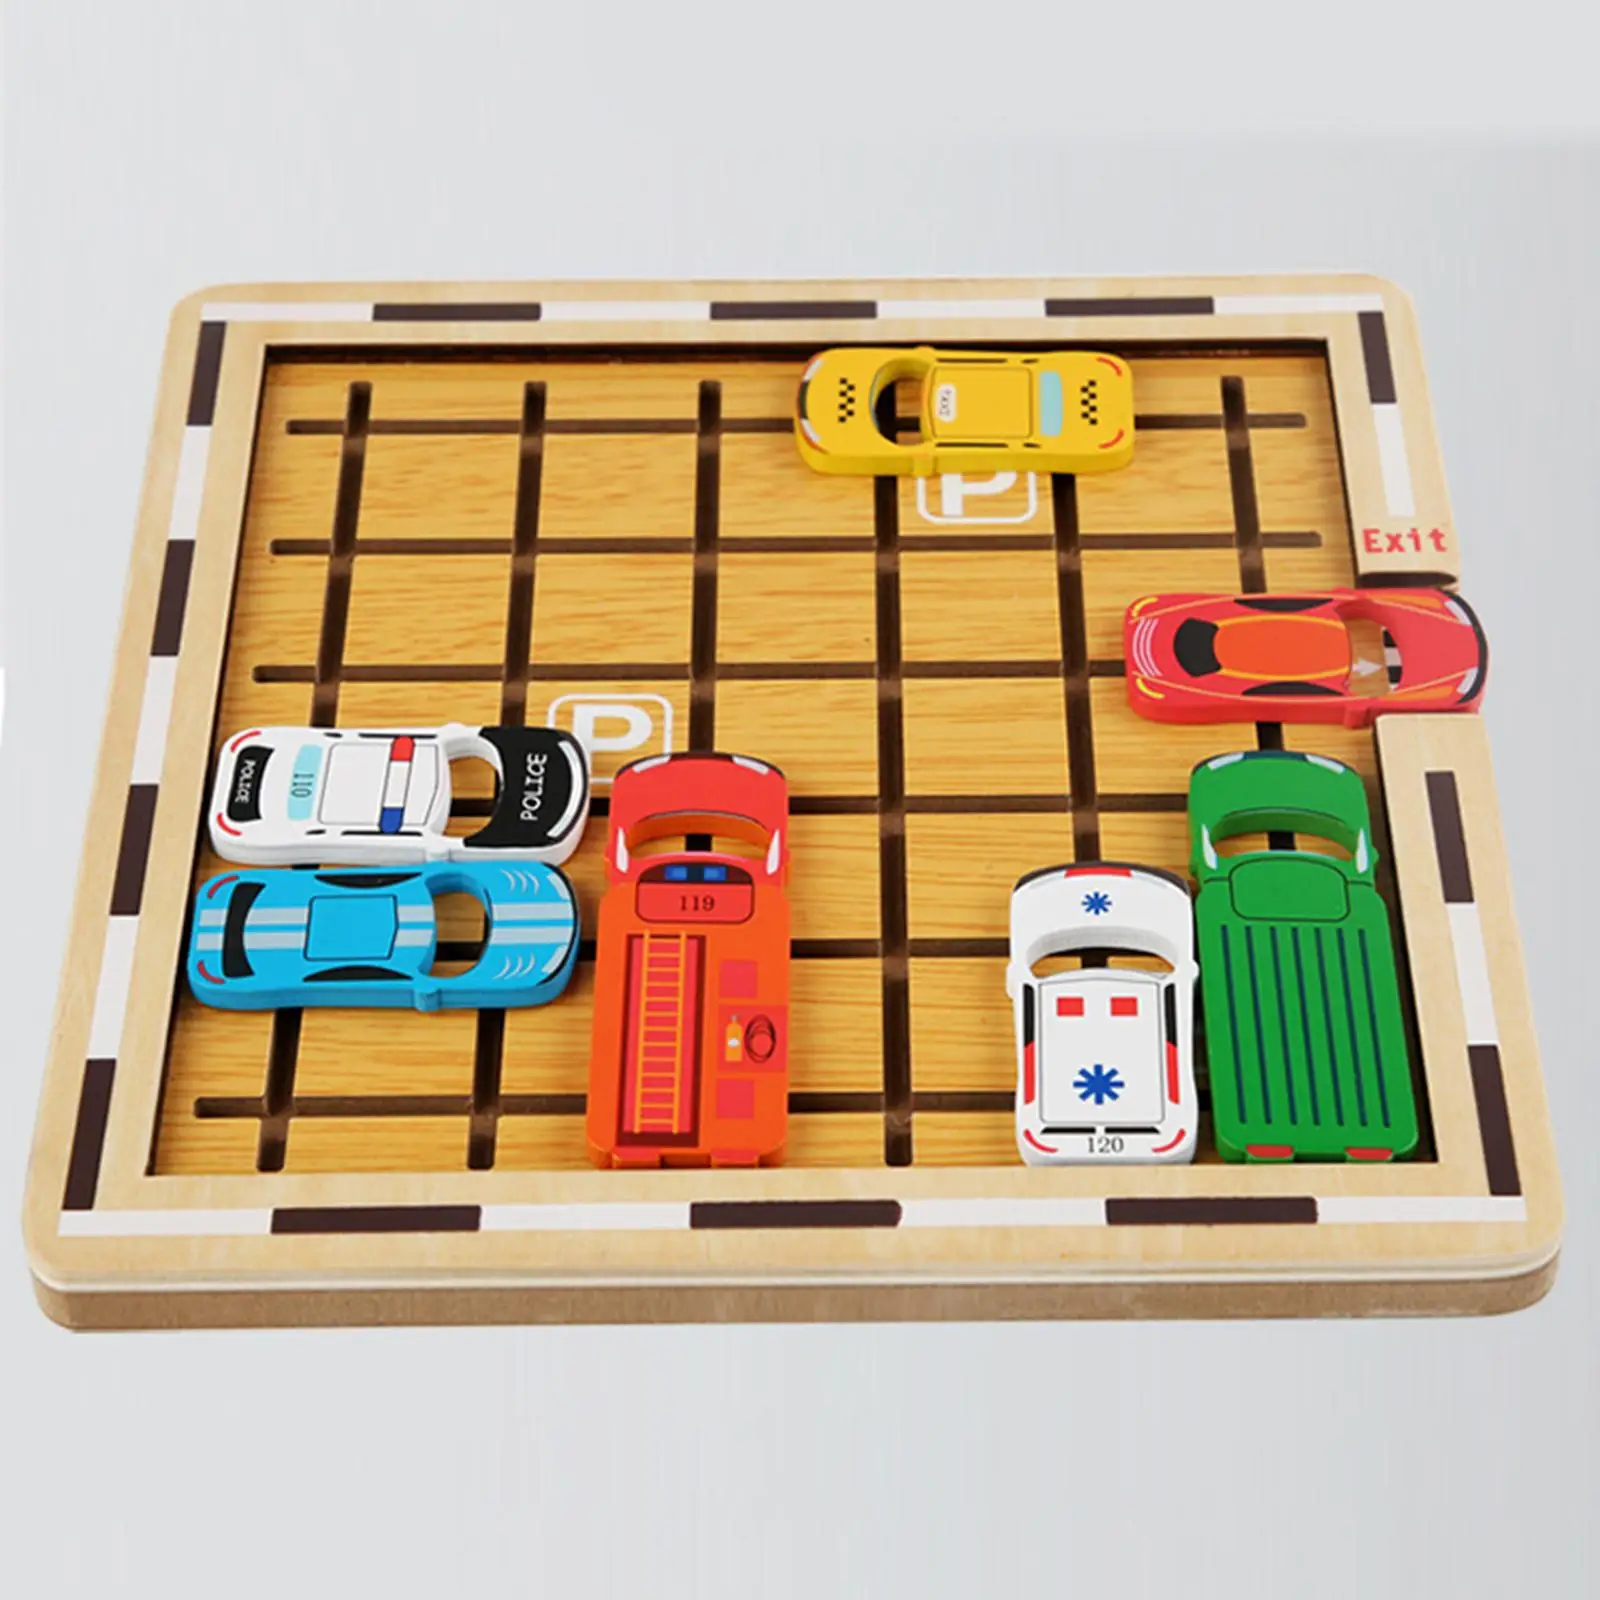 Wooden Early Education Car Sensory Toy Logical Thinking Training Exercise Brain Ability Fine Motor Skills for Boys Kids Gifts